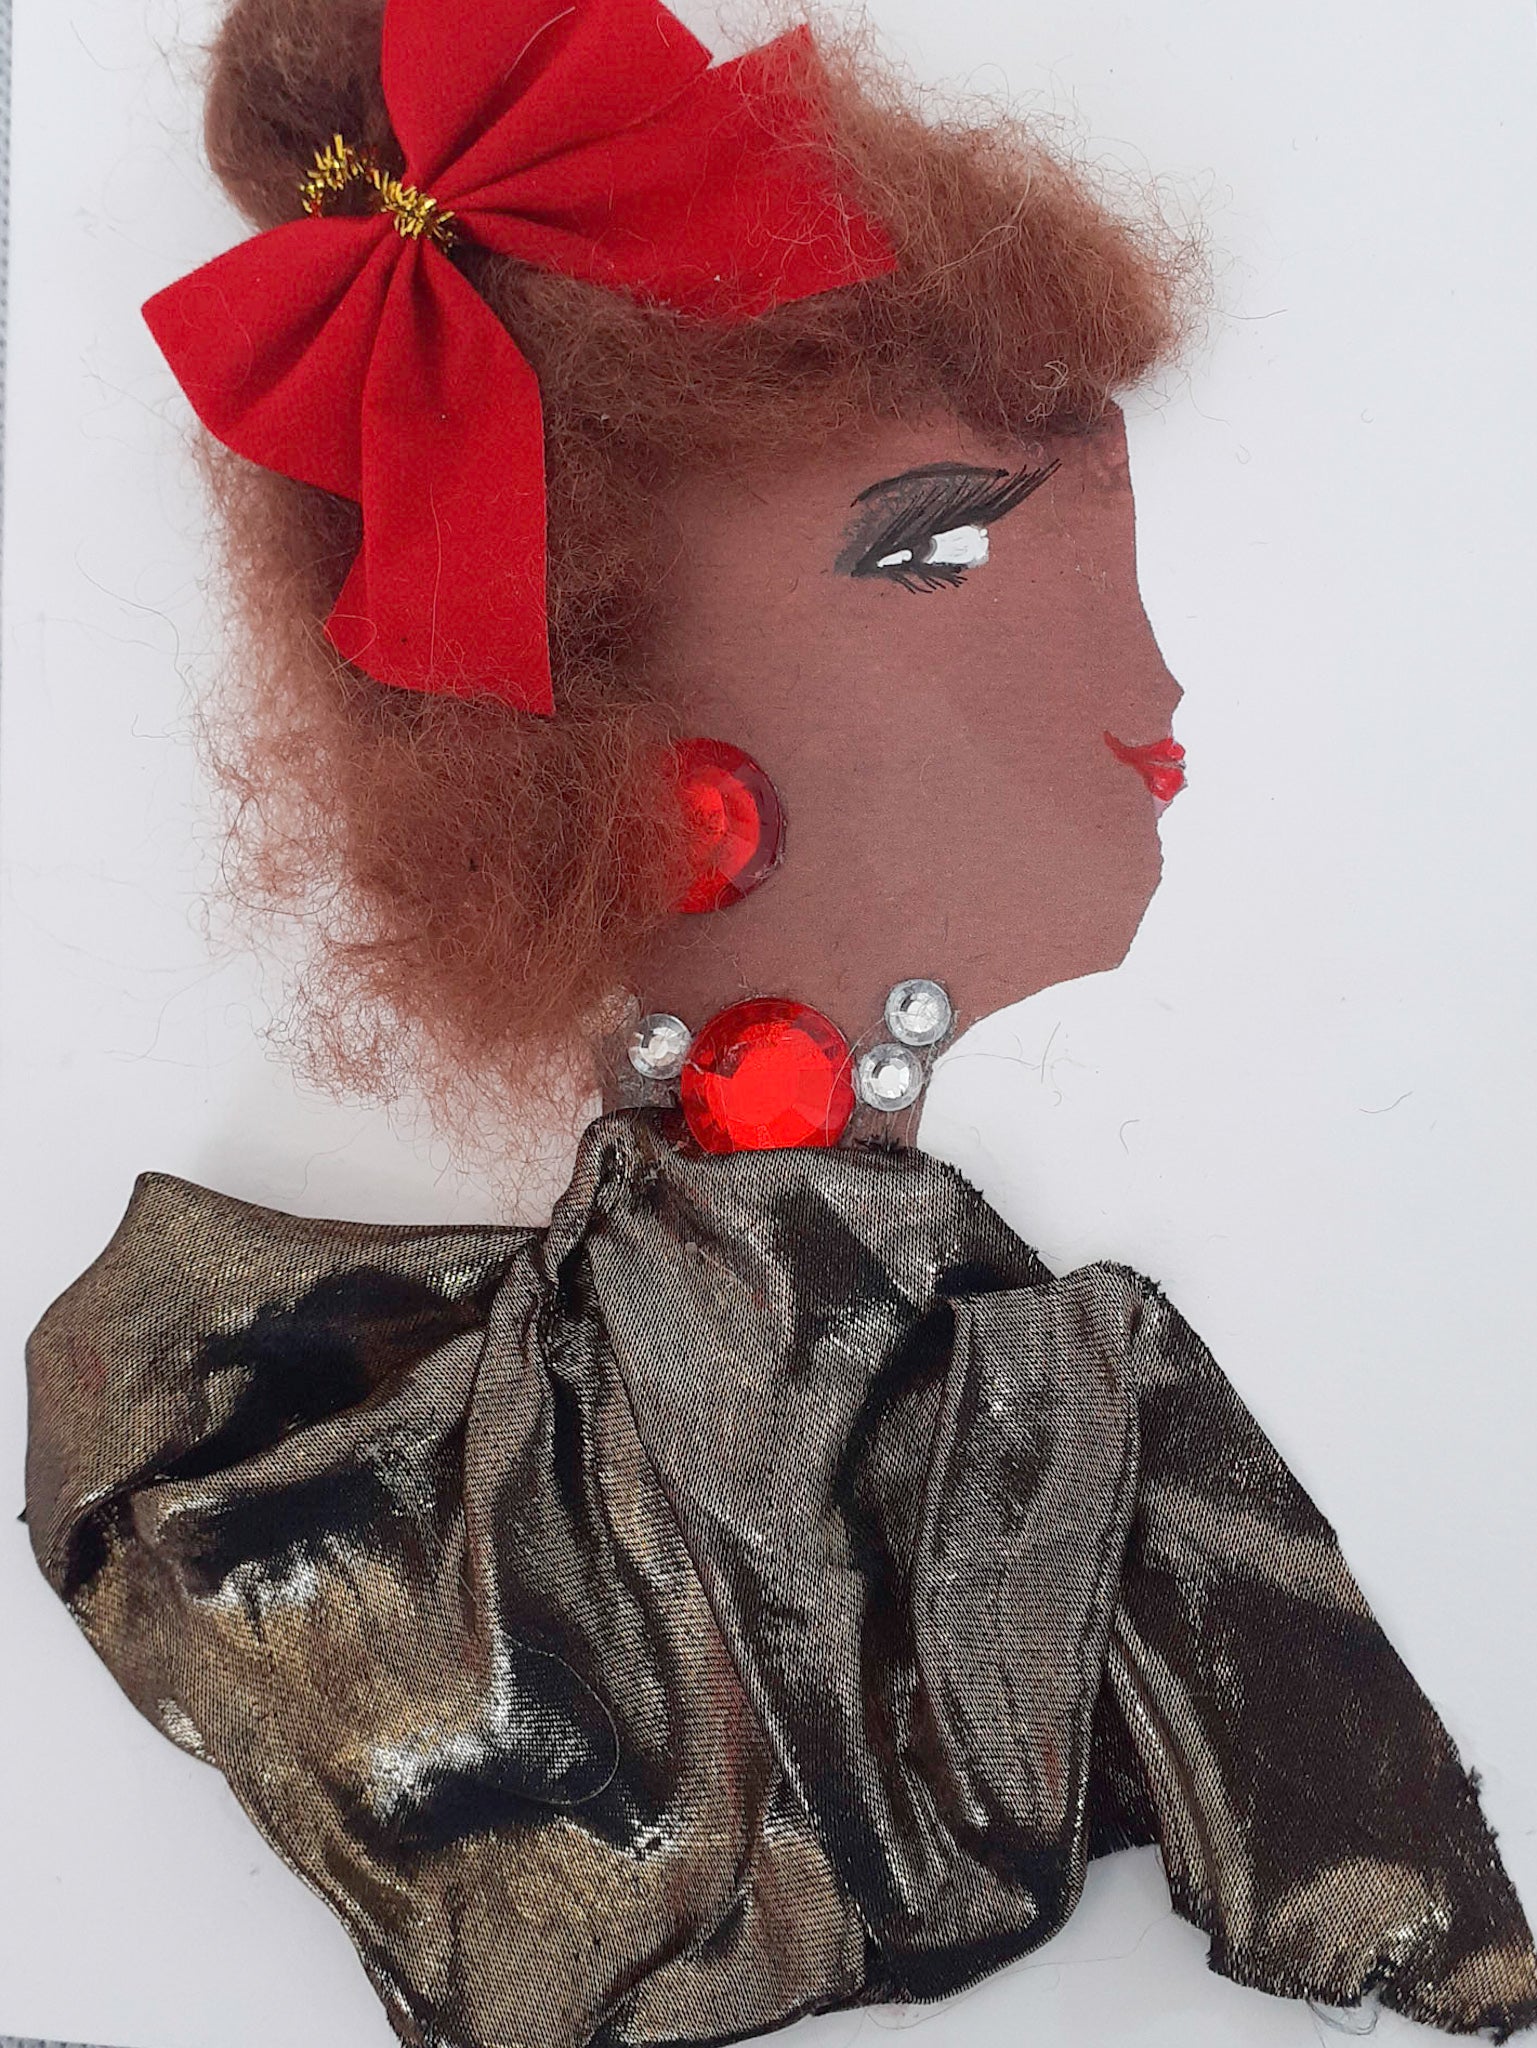 This card has been given the name Vogue. She wears a bronze fabric blouse and a necklace made up of one large red gem and several small crystal gems. She wears a large red bow in her reddish-brown hair. 